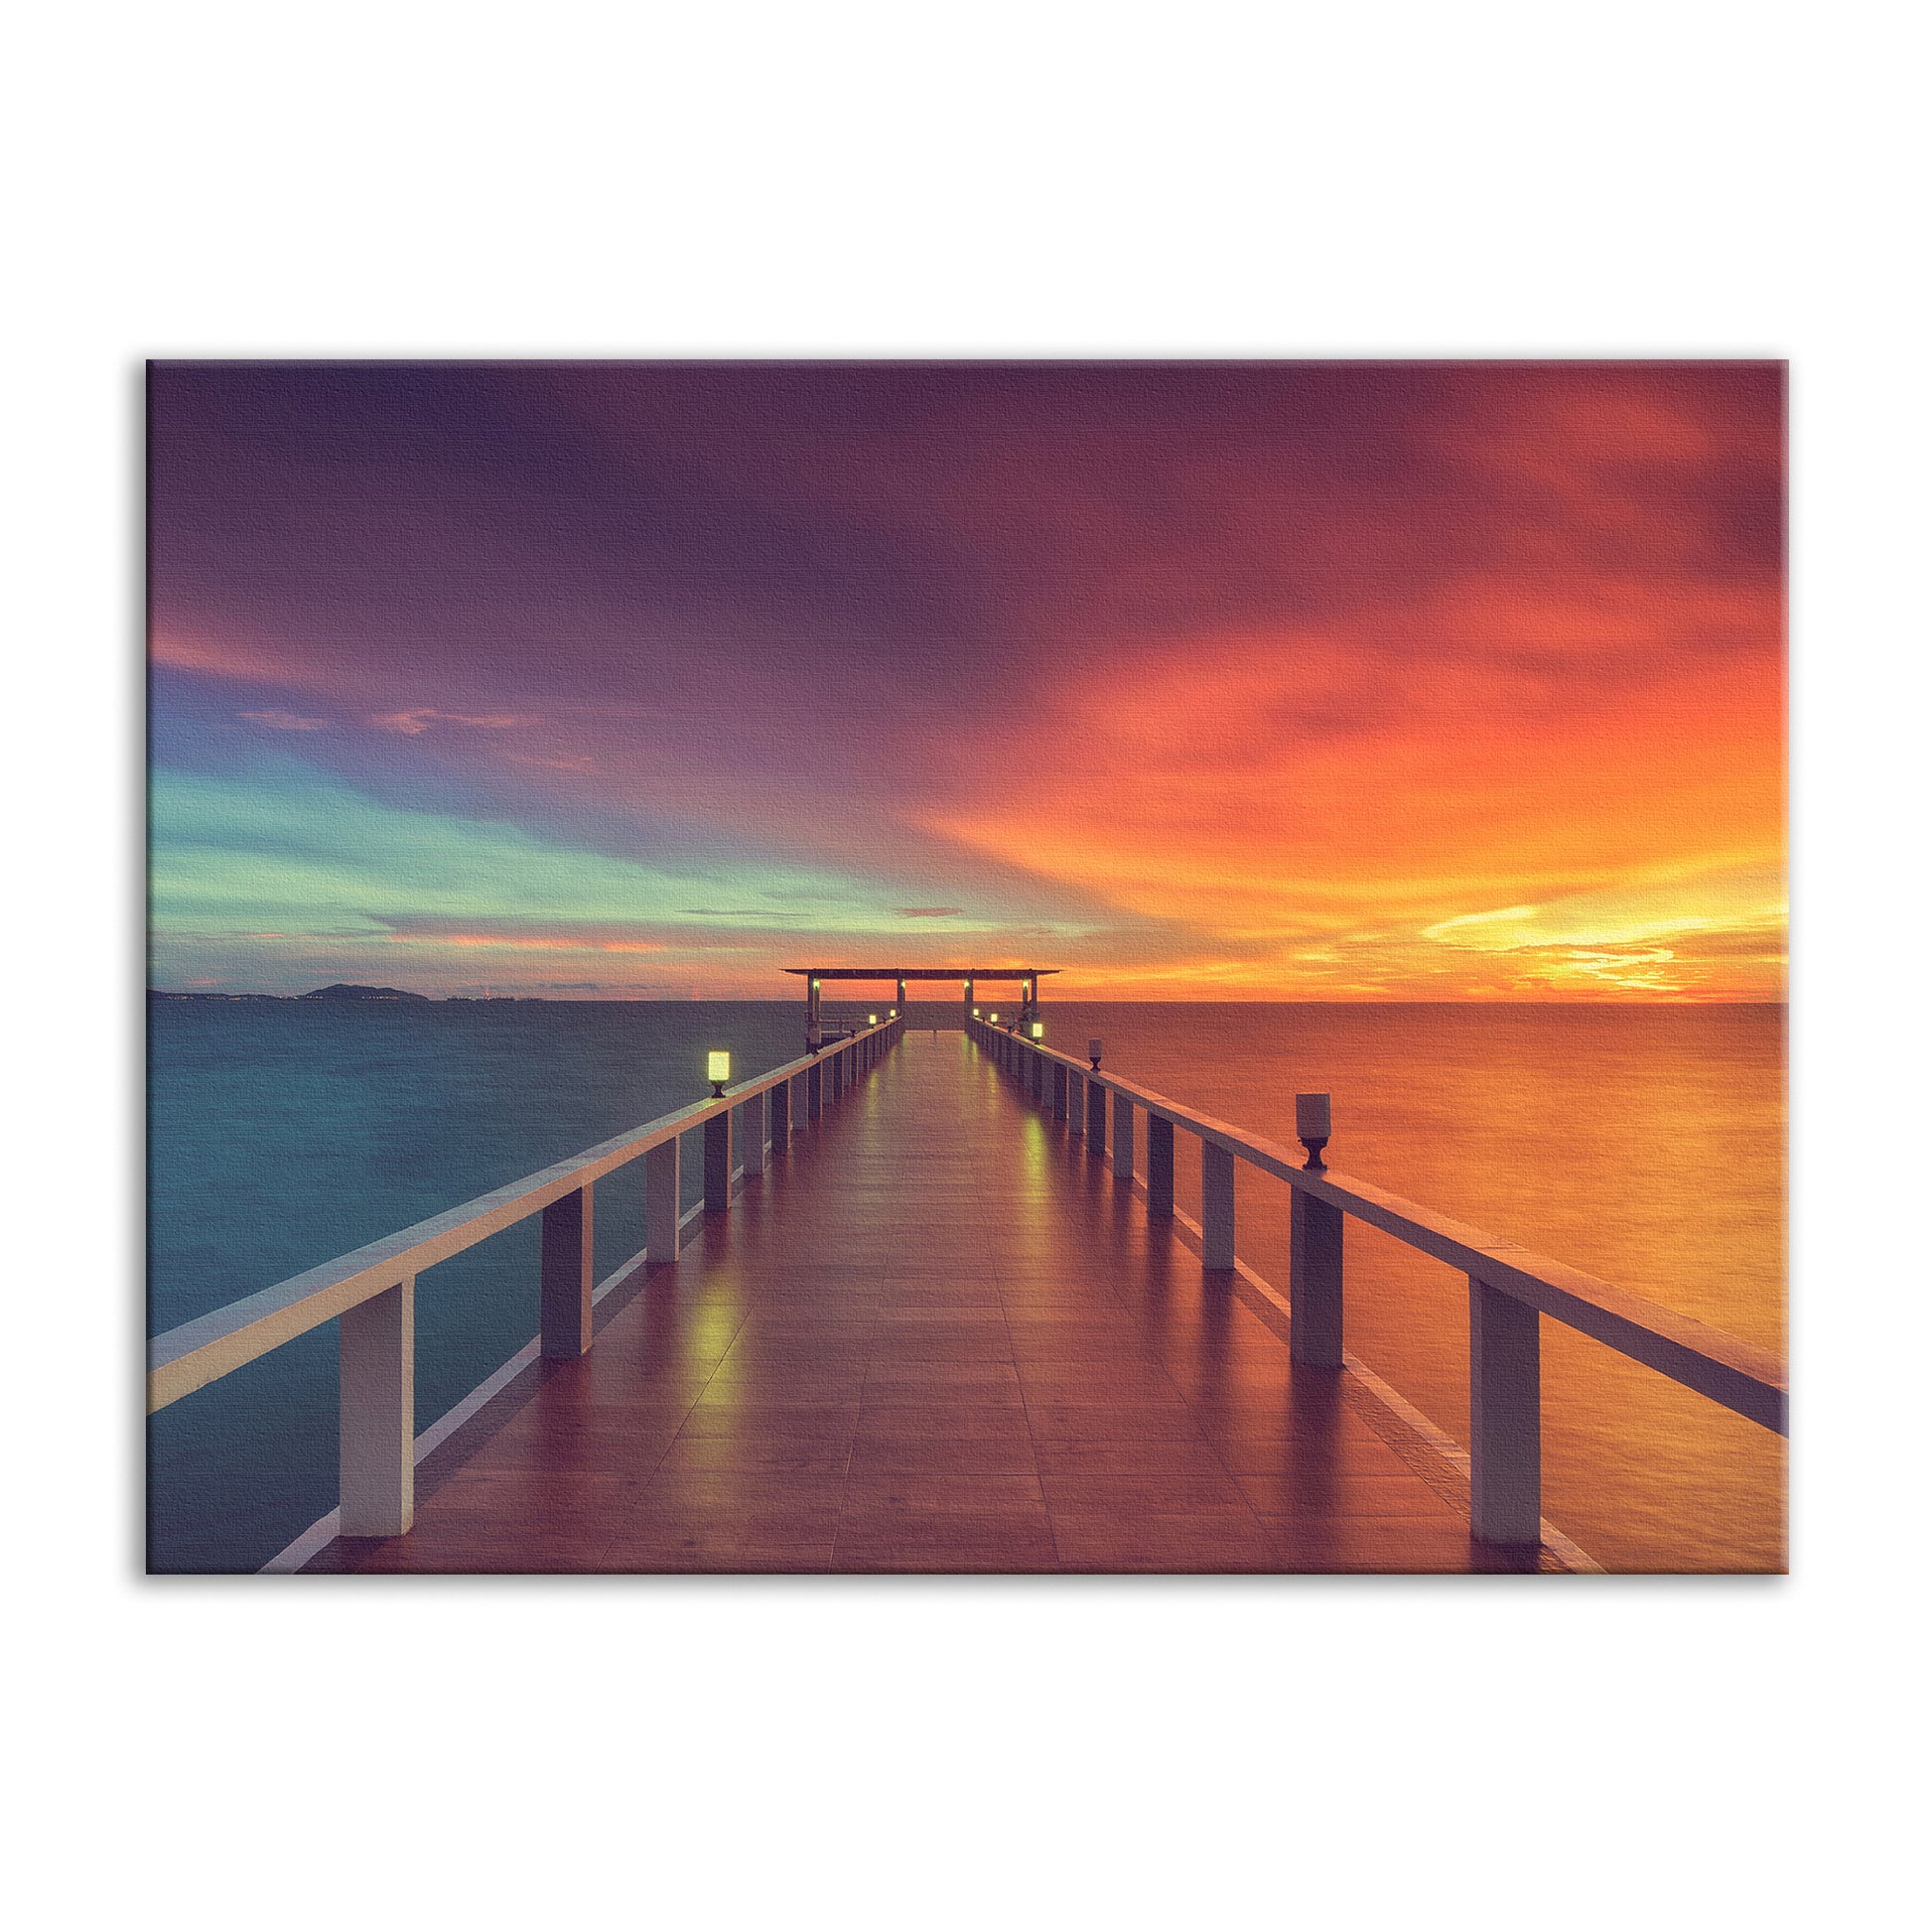 Beach Scene Art Prints: Surreal Wooden Pier At Sunset with Intrigued Effect Landscape Photo Canvas Wall Art Prints